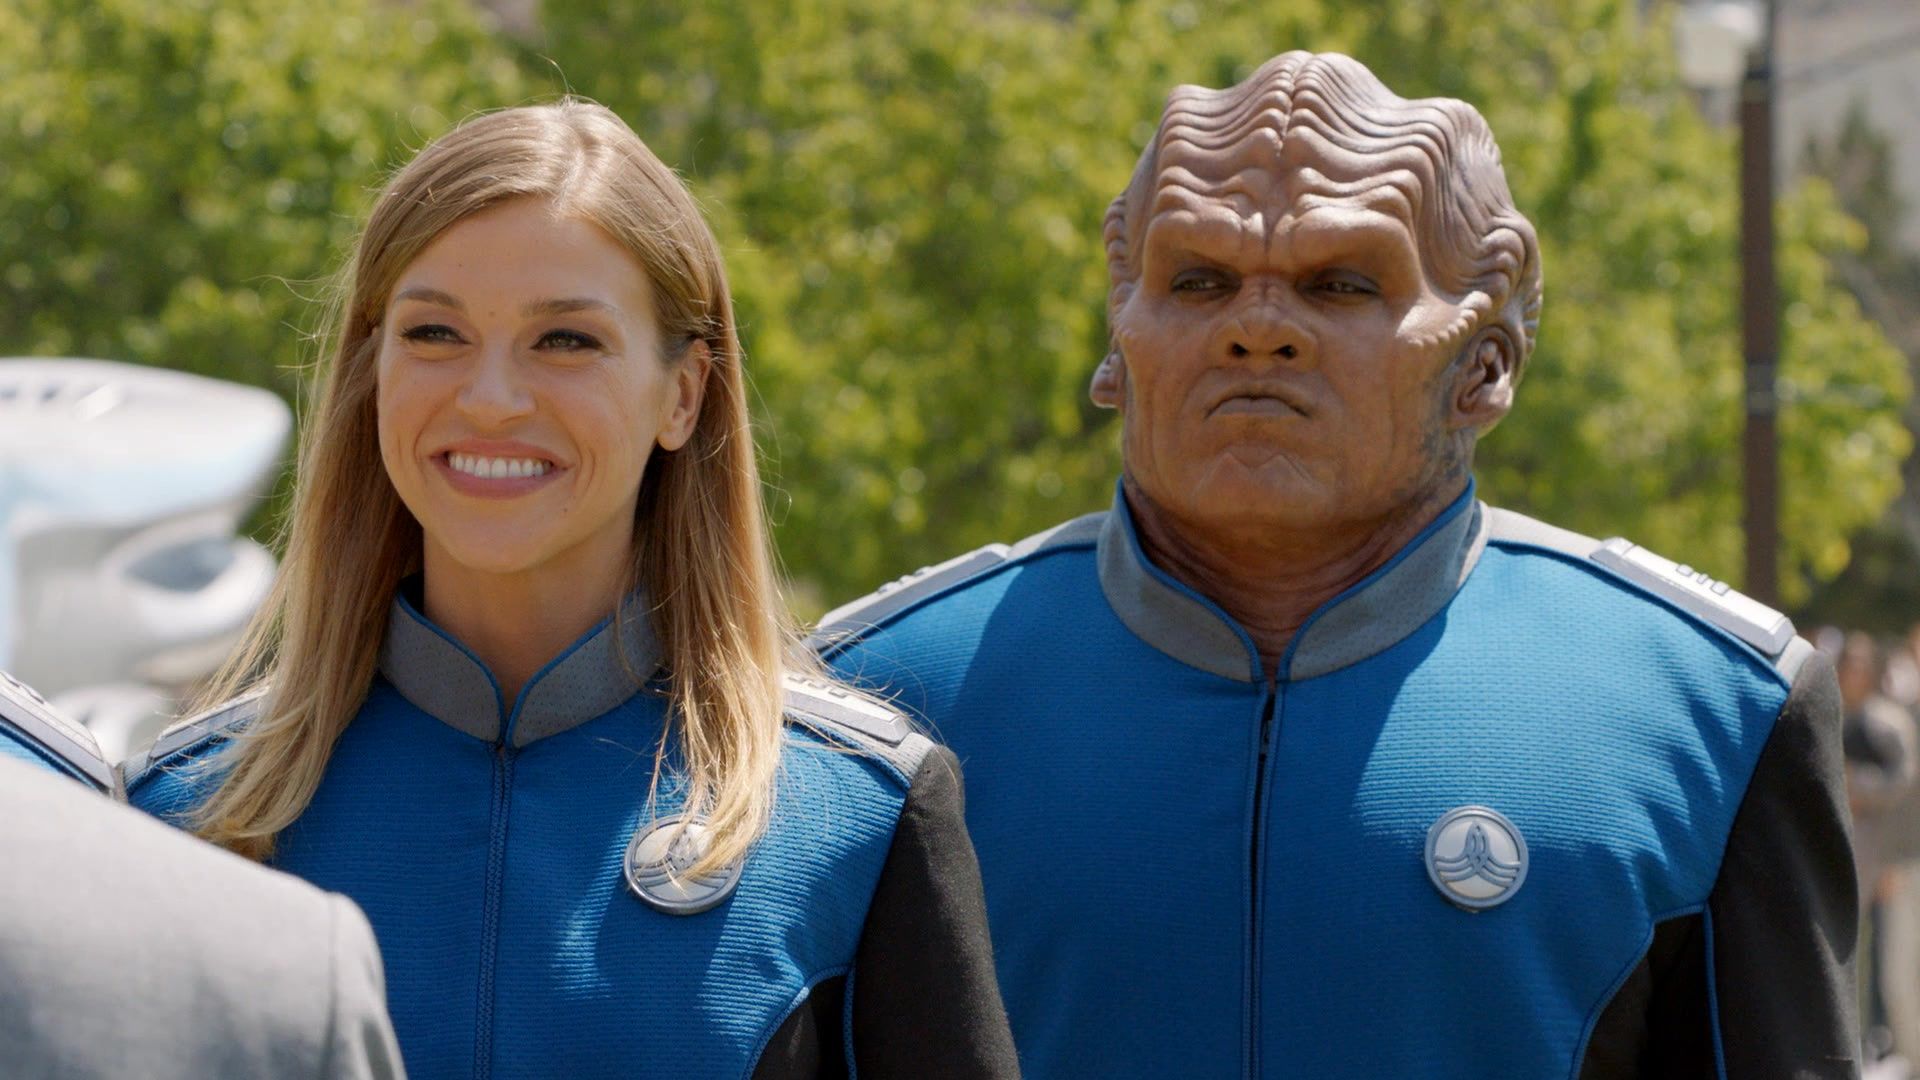 The_Orville_S02E05_All_the_World_is_Birthday_Cake_1080p_AMZN_WEB-DL_DDP5_1_H_264-NTb_0458.jpg